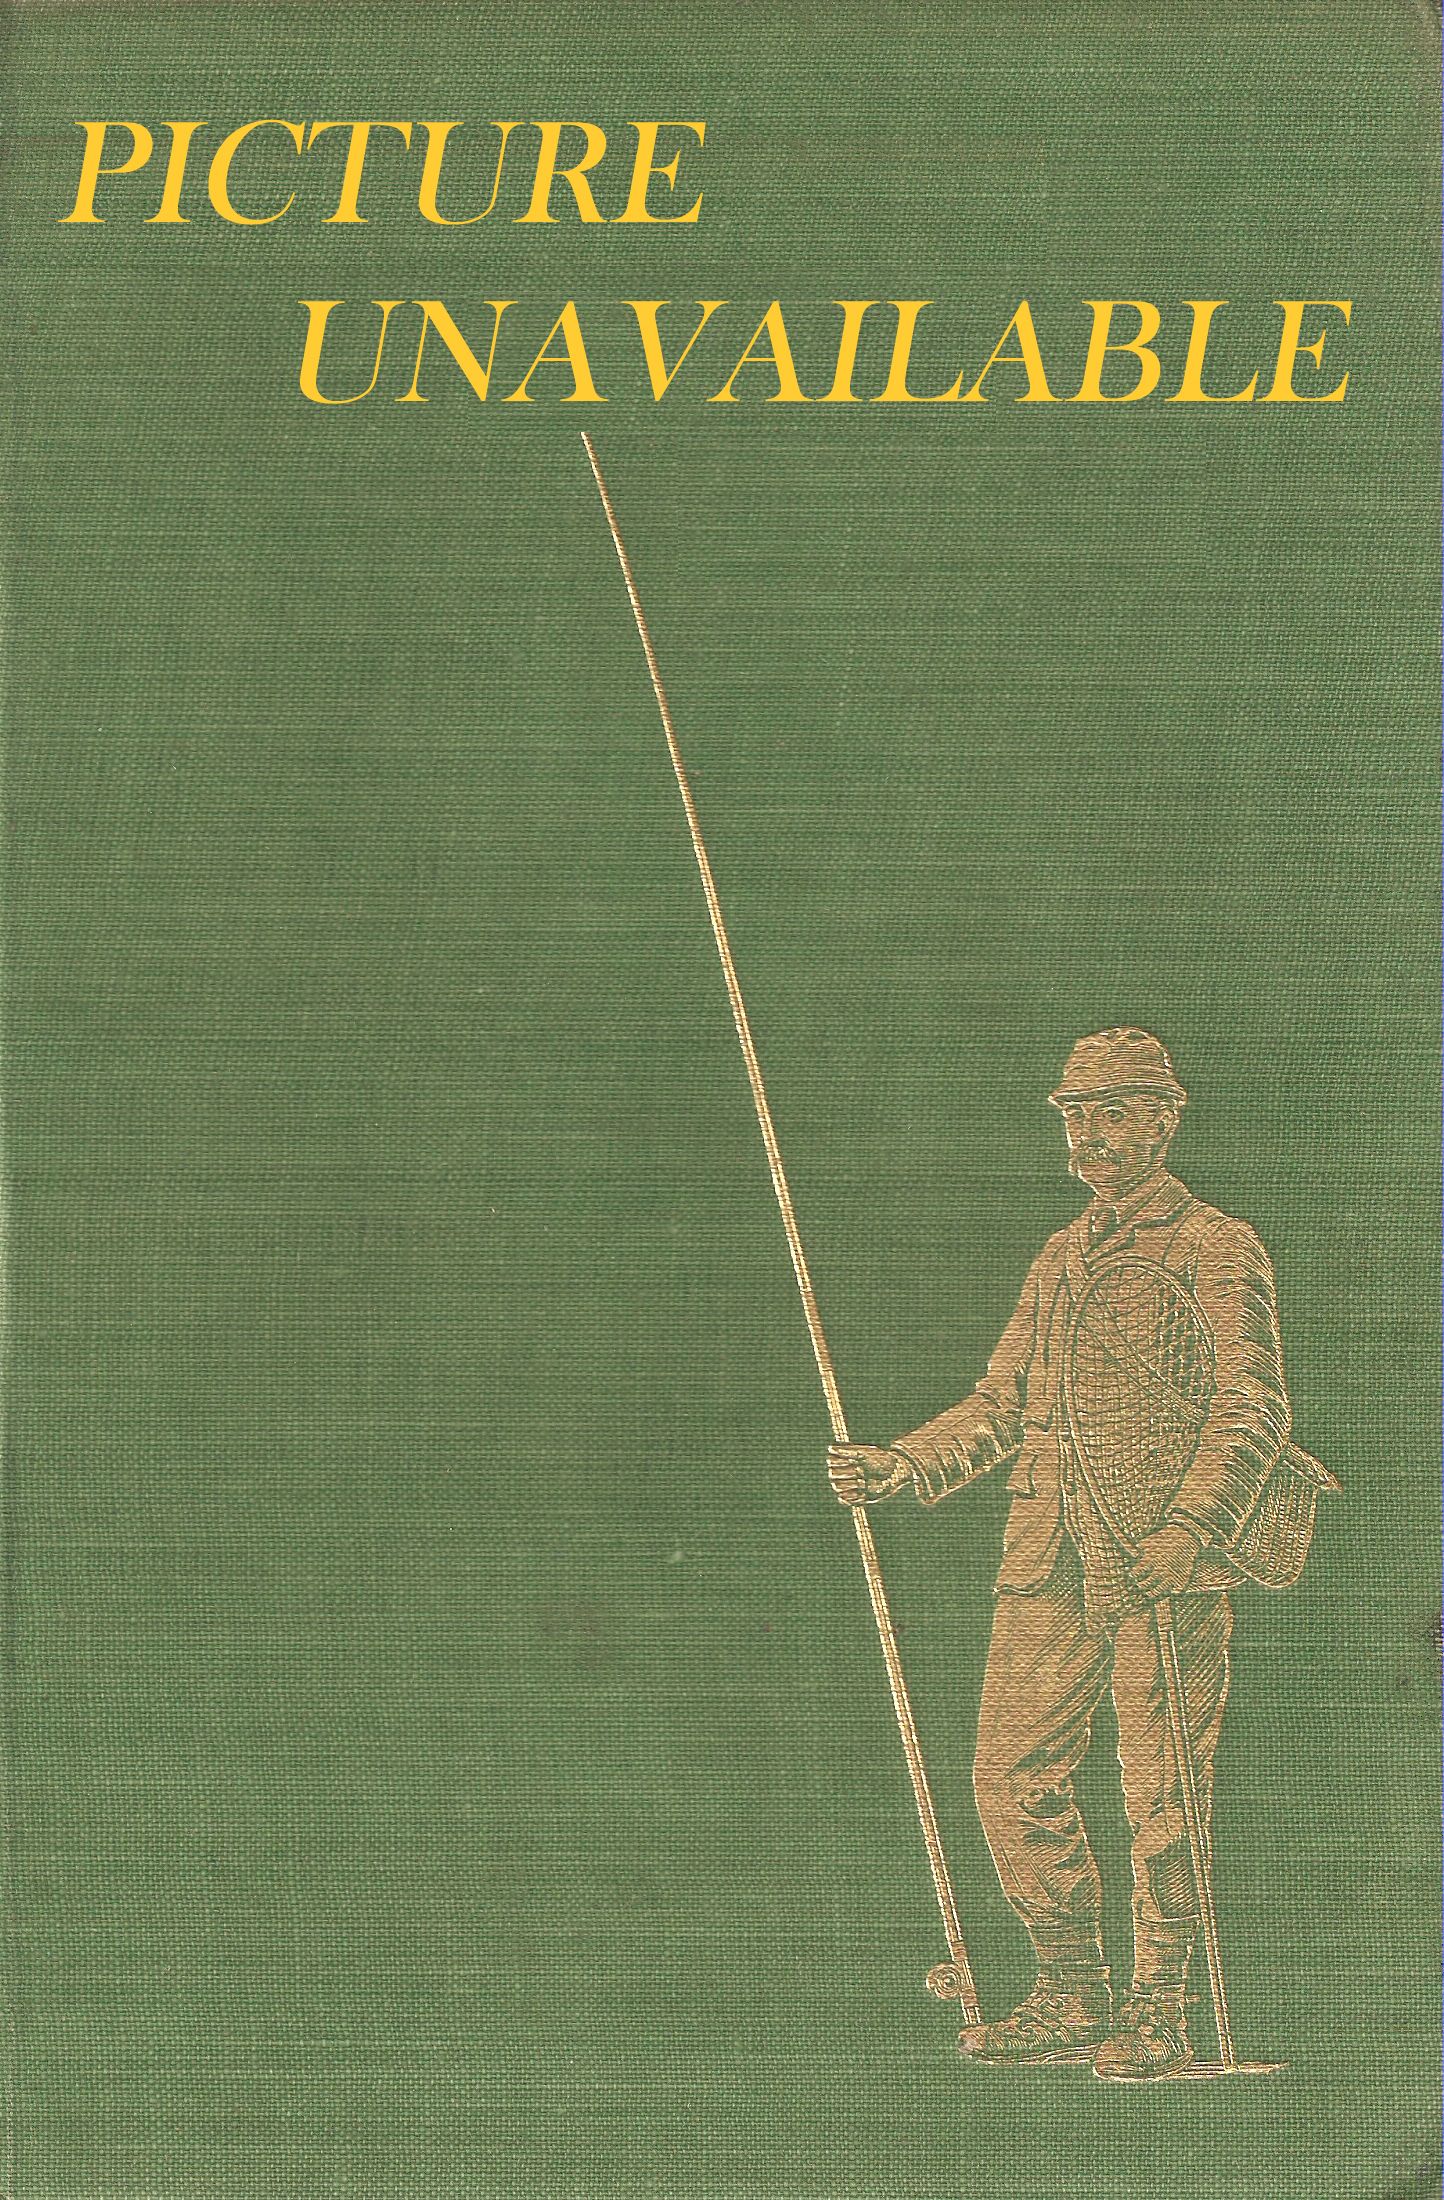 COMPLETE GUIDE TO SEA FISHING. By Hugh Stoker. Tackle drawings by author.  Fishing drawings by R.E. Legge.